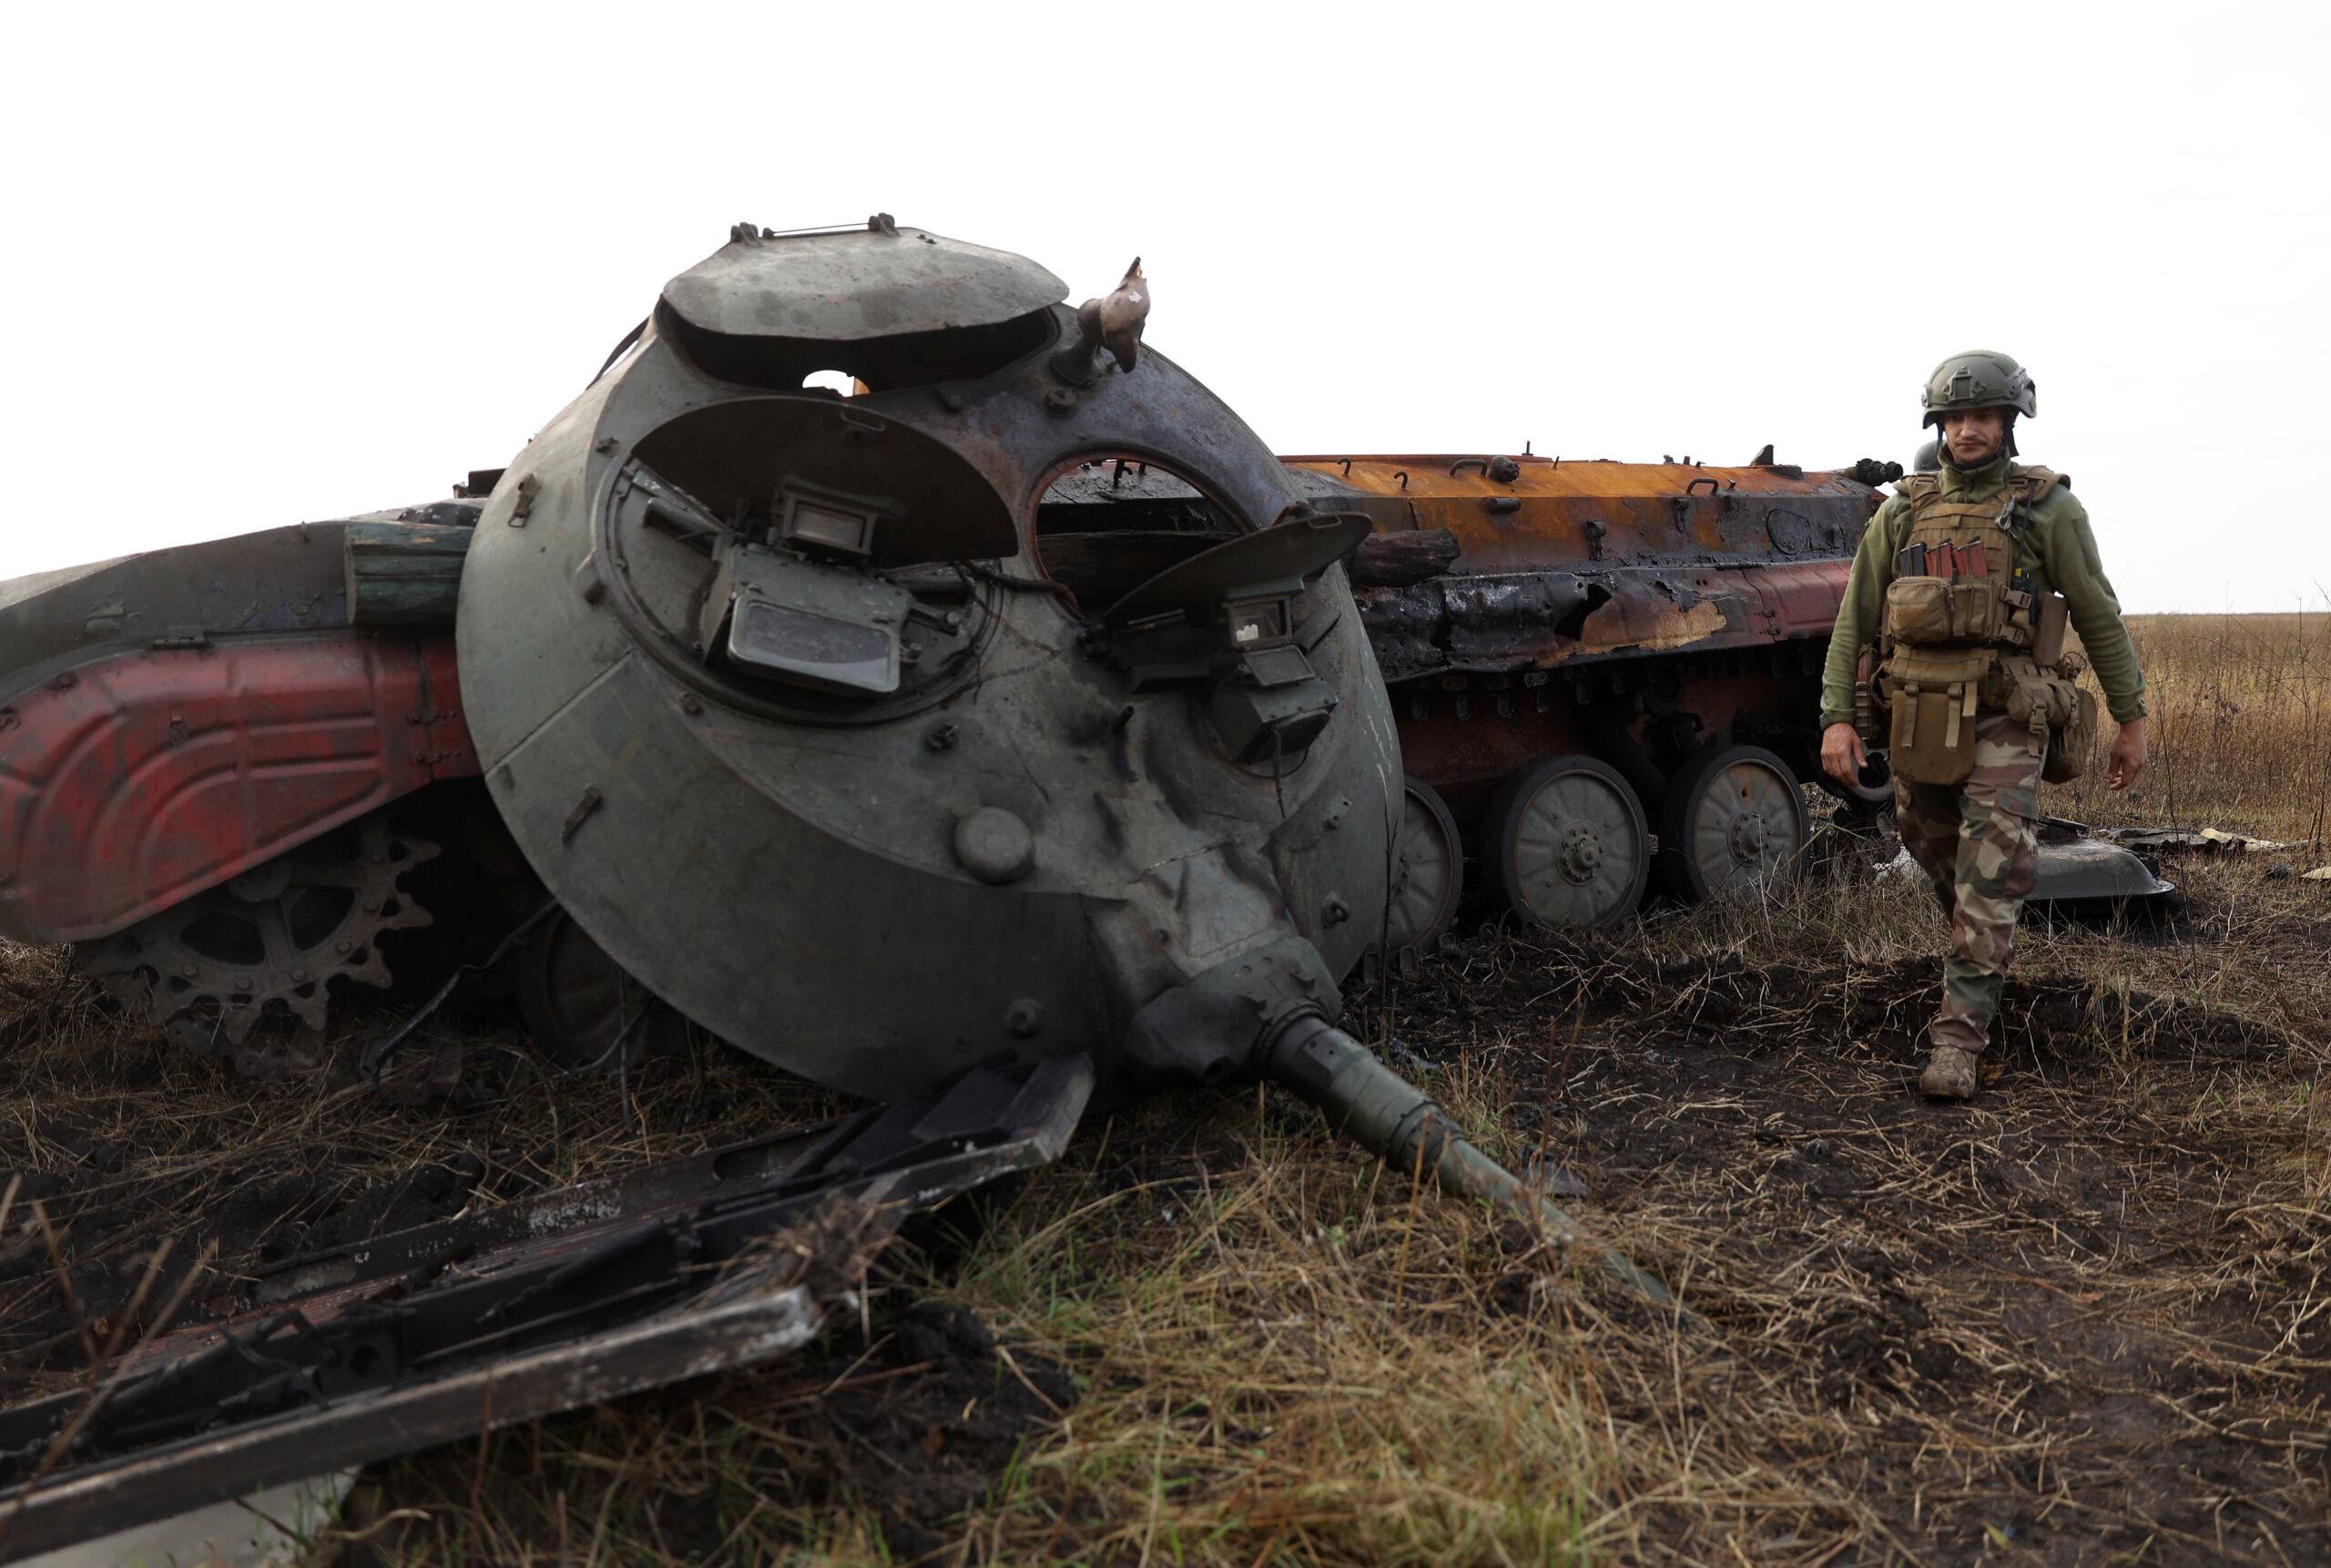 A Ukrainian soldier walks past a destroyed Russian tank on the front line with Russian troops in Donetsk region on September 28, 2022. (Photo by Anatolii Stepanov / AFP)